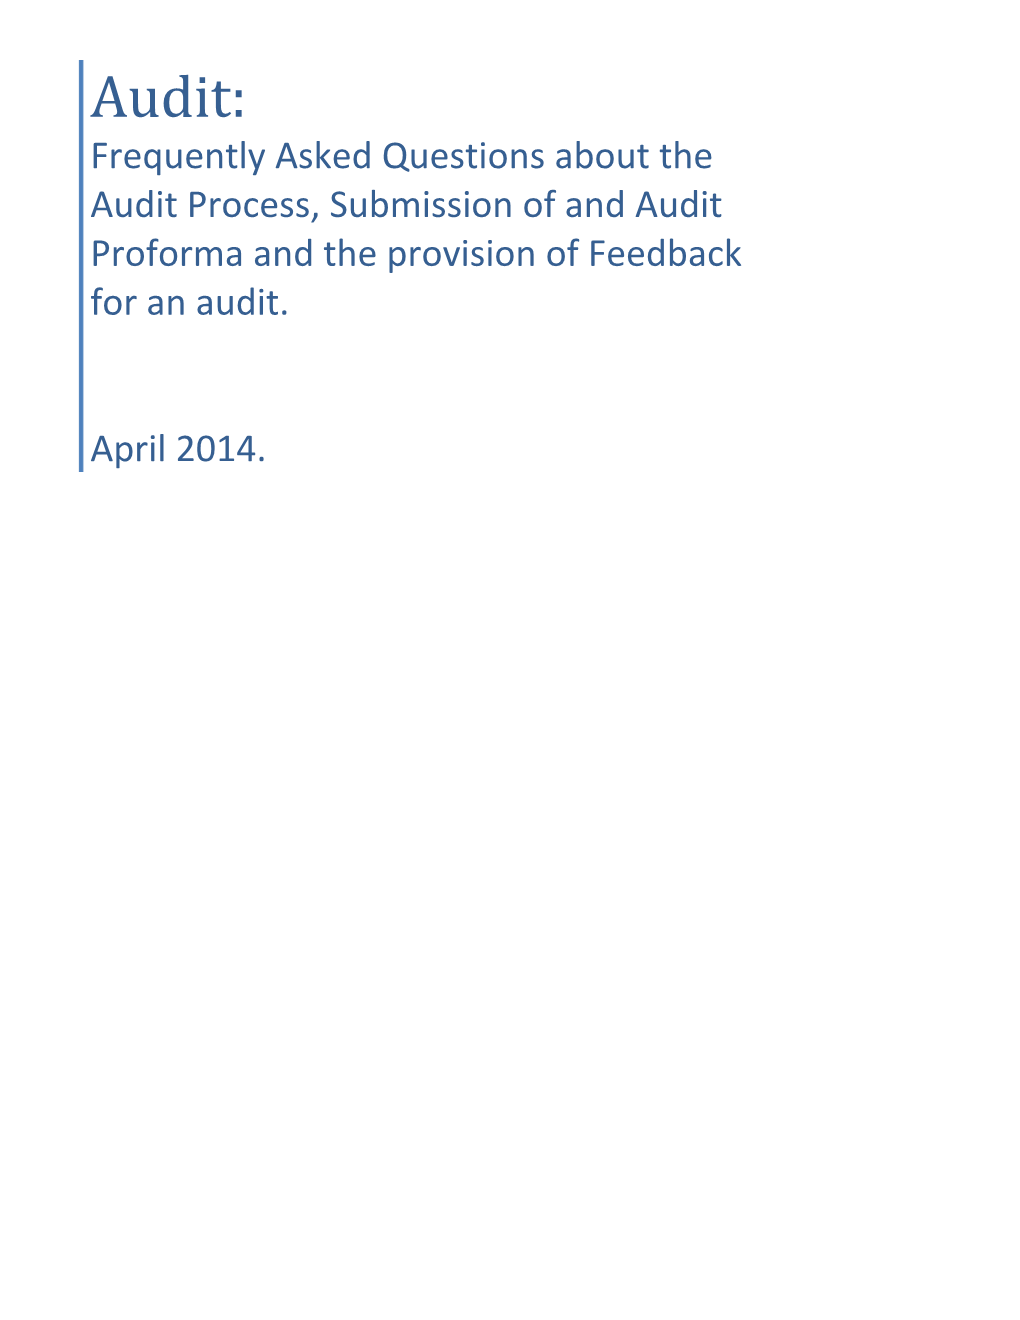 Q1. What Is an Audit?